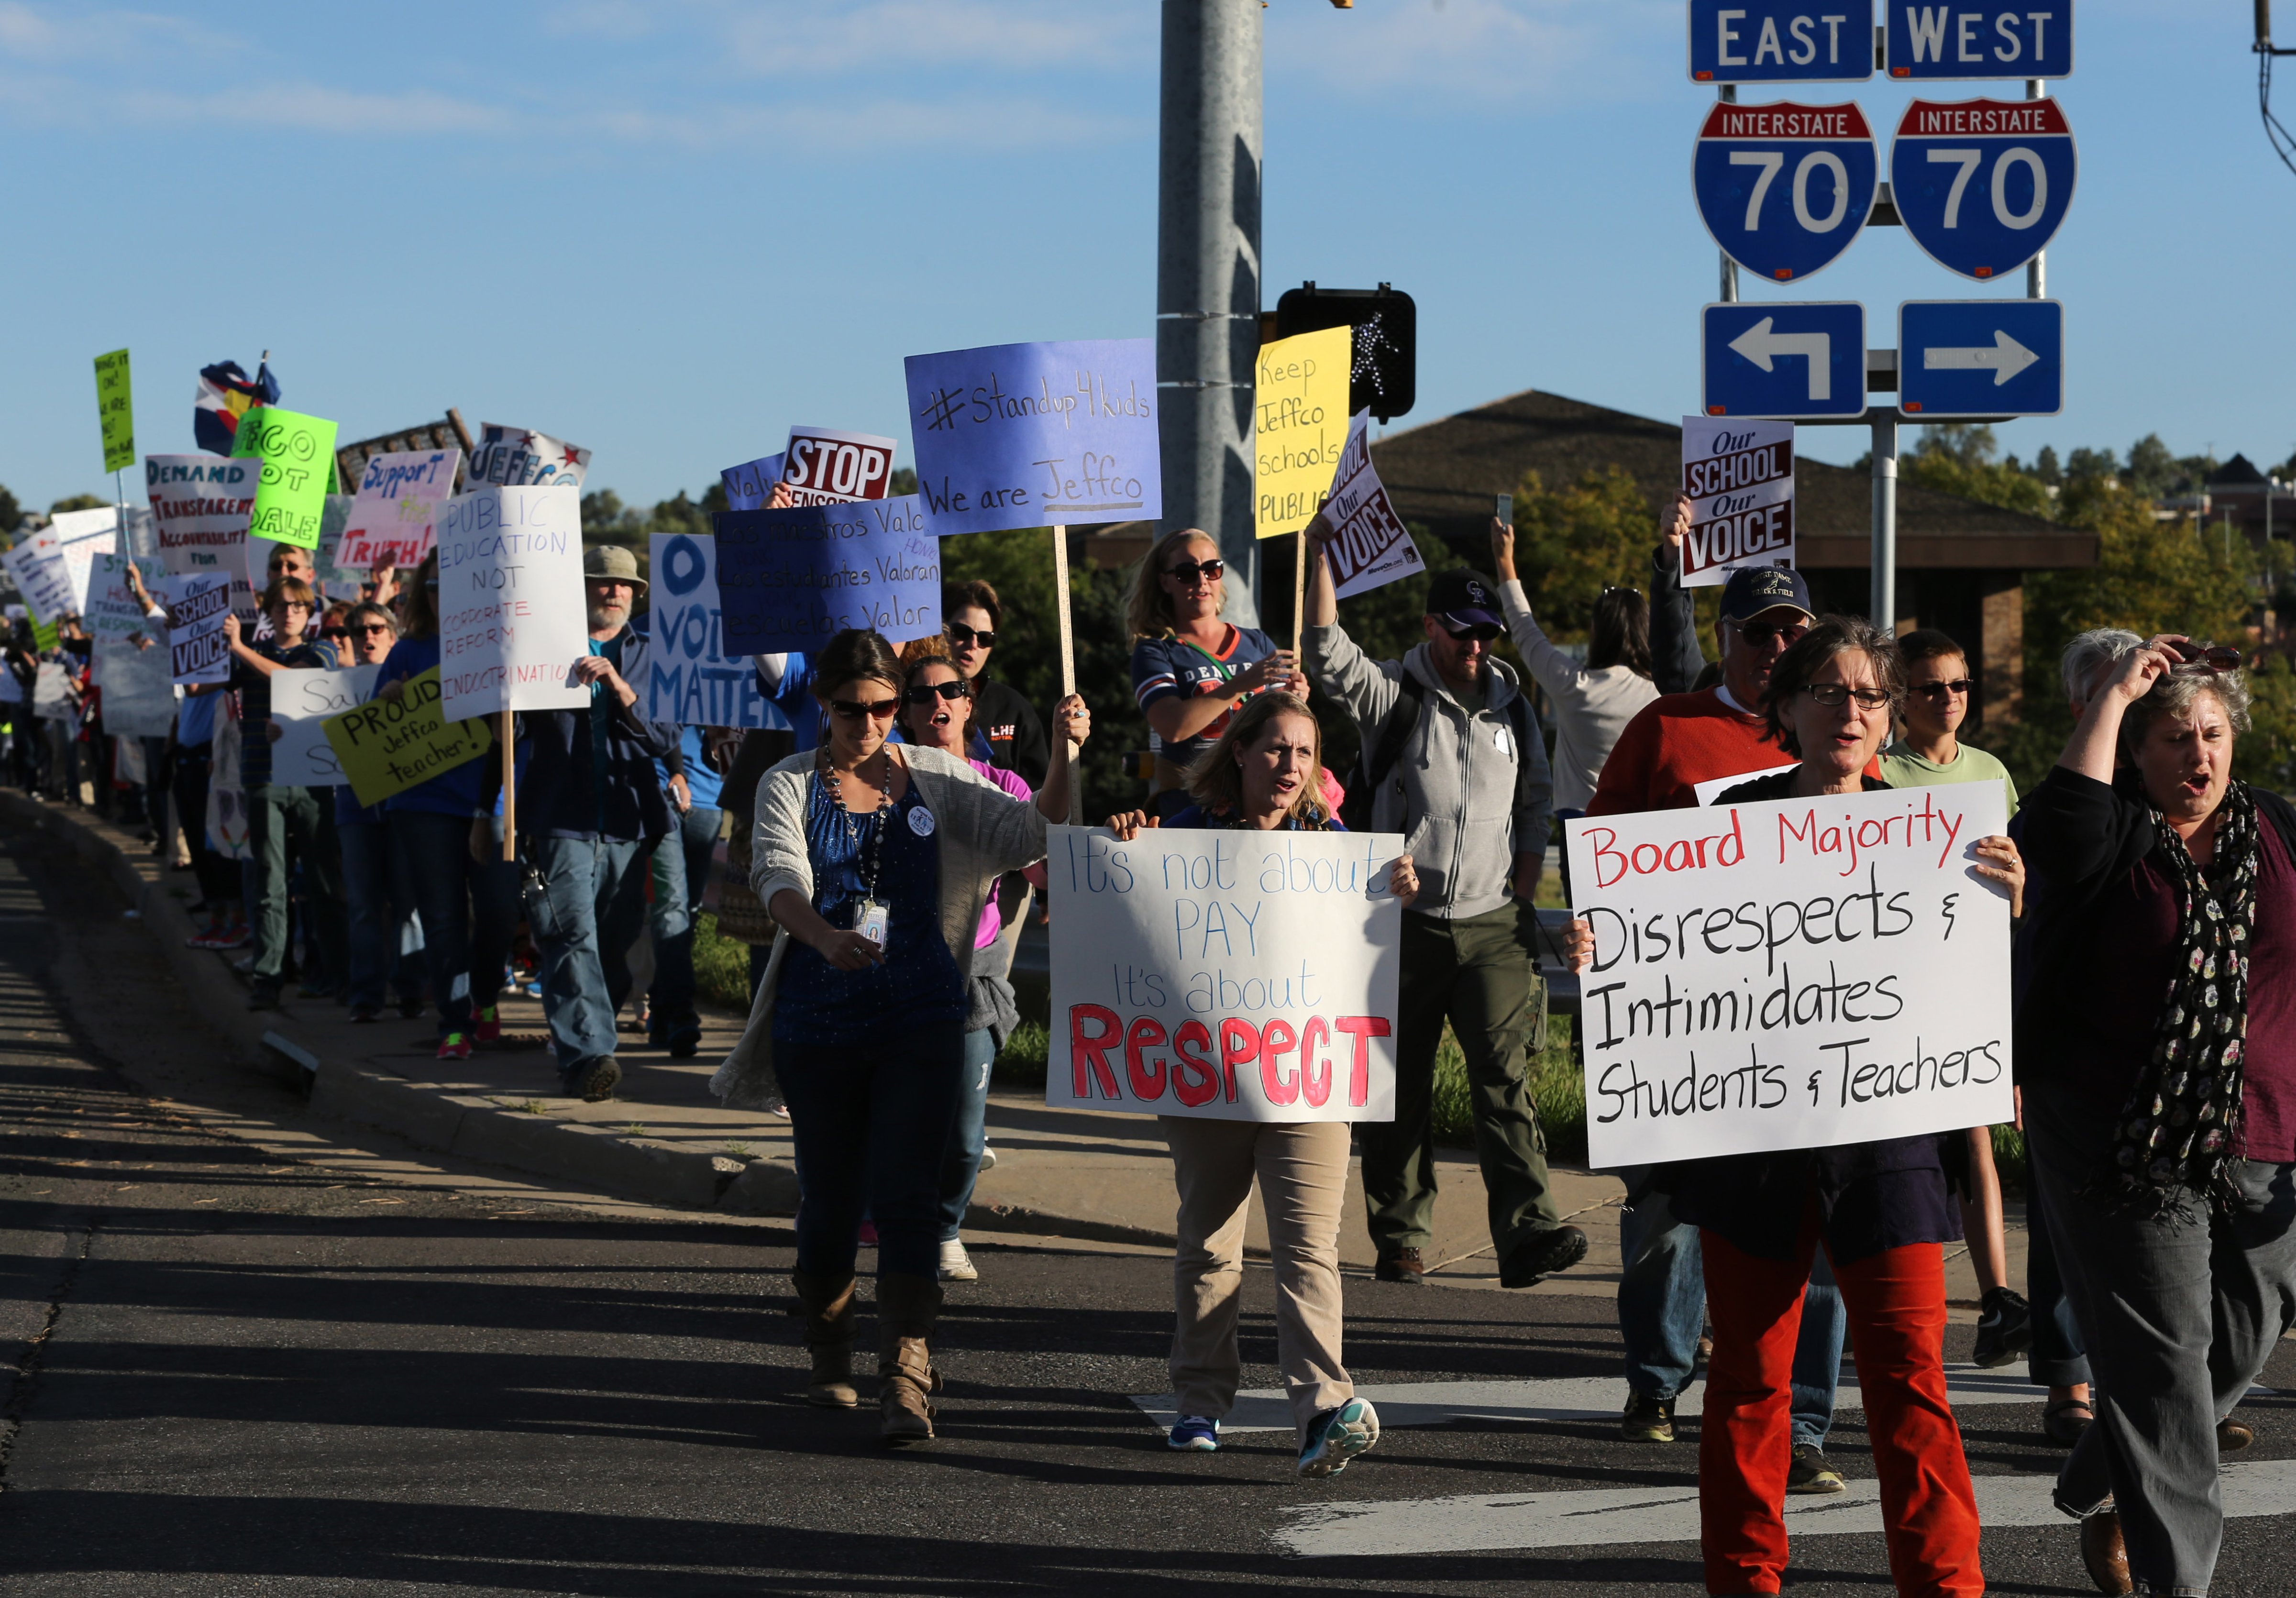 Teachers, students and supporters march near the location of an ongoing Jefferson County School Board meeting, in Golden, Colo., Thursday, Oct. 2, 2014. (Brennan Linsley—AP)